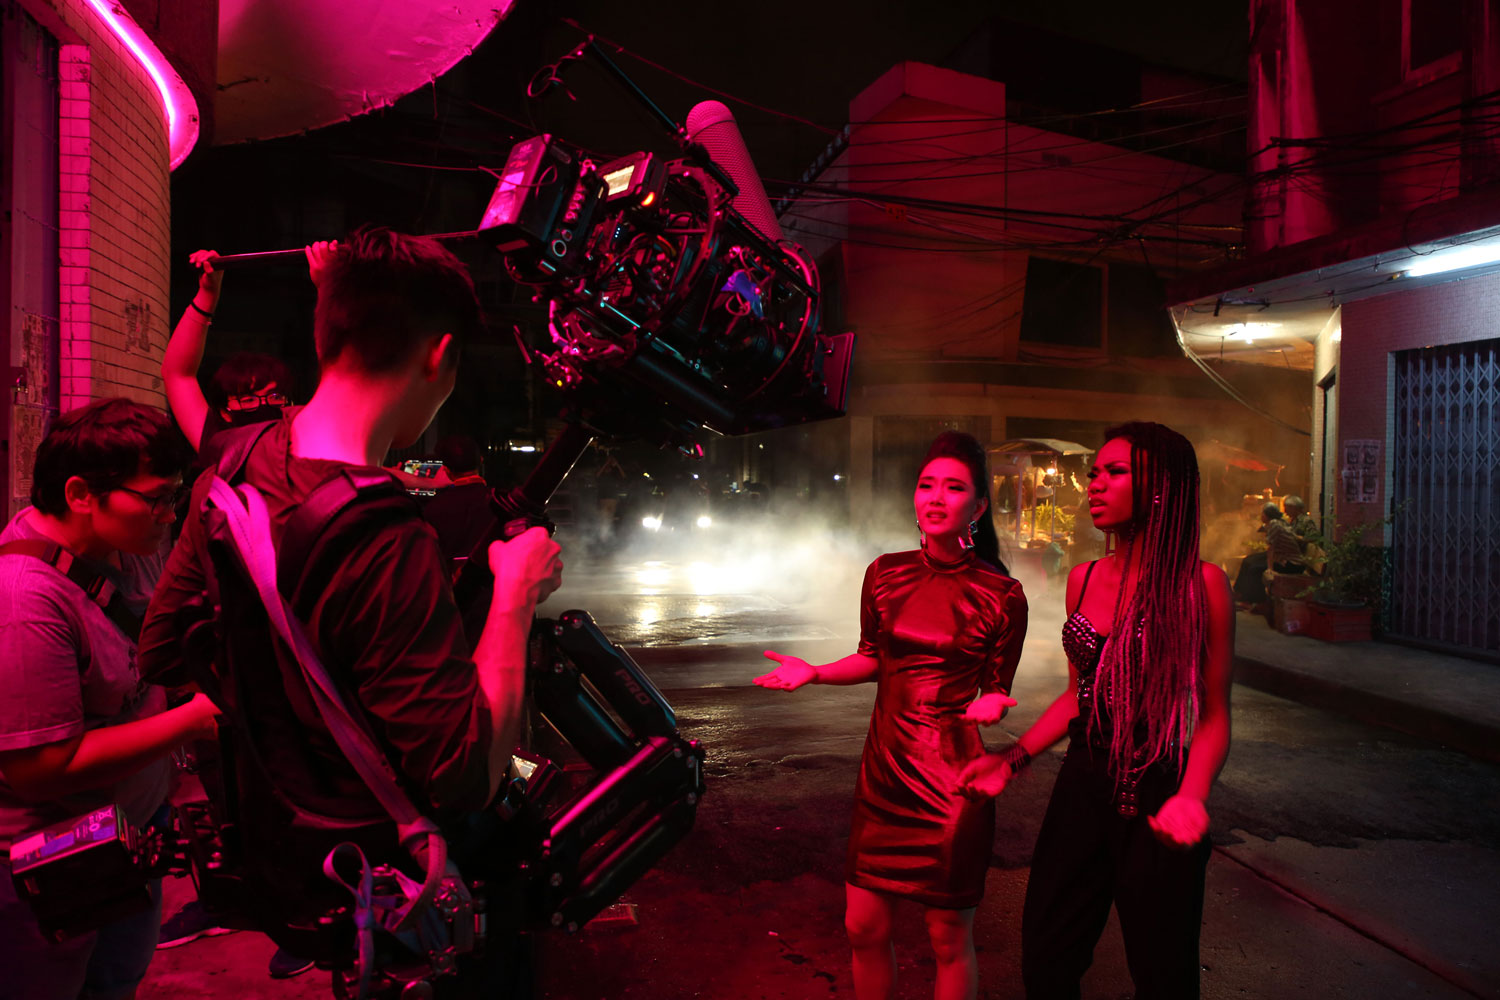 Behind the scenes Samsonite TVC in Thailand, production services by Eastness